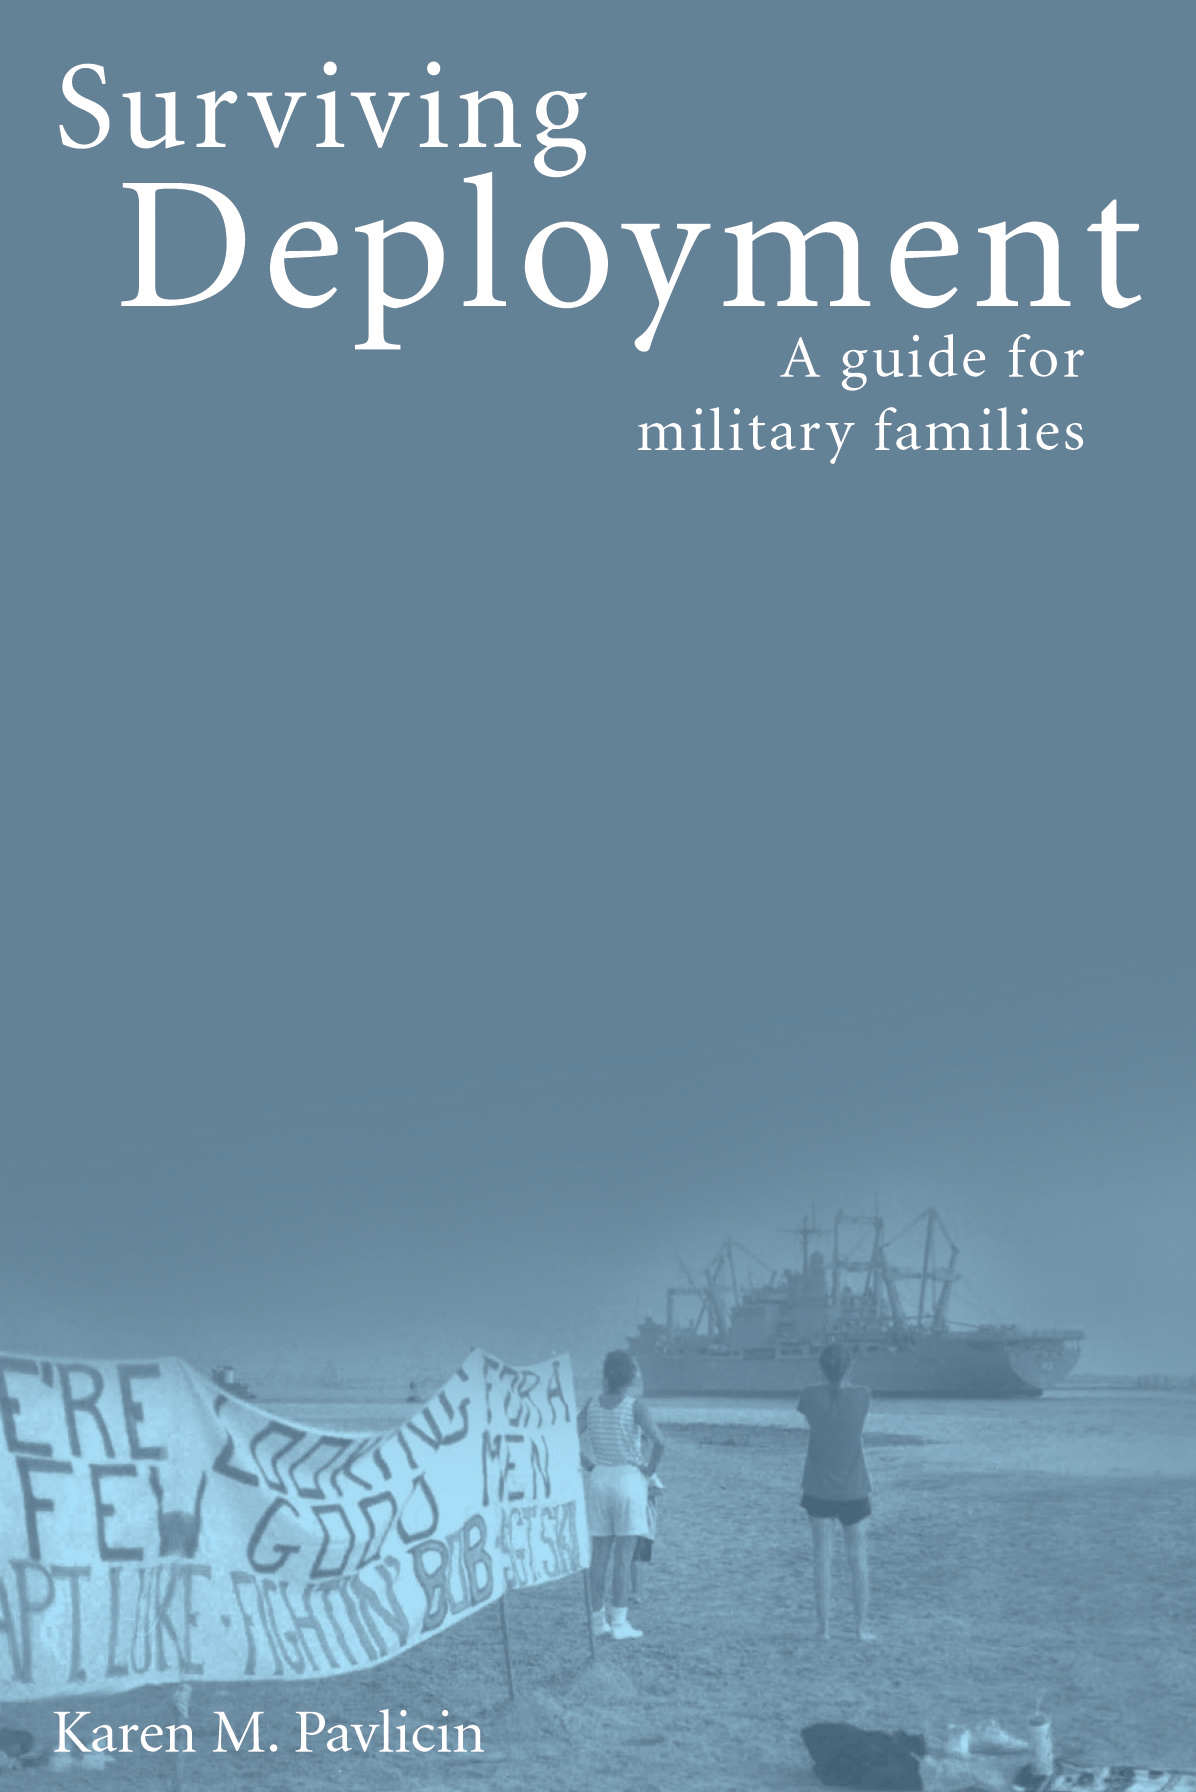 Surviving Deployment: A guide for military families by Karen Pavlicin